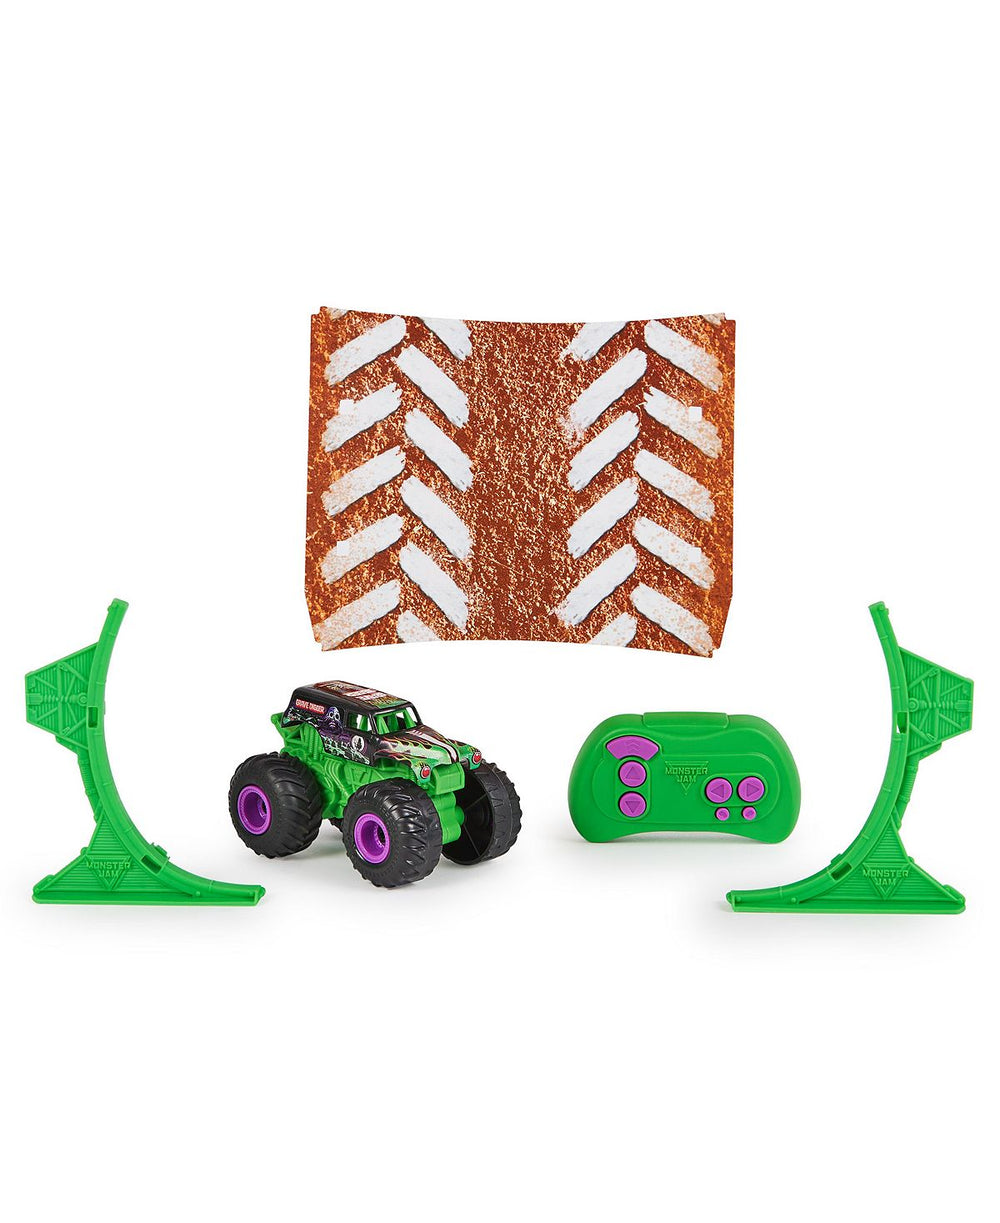 Monster Jam Grave Digger RC Monster Truck - 1:64 Scale with Ramp and Turbo Boost